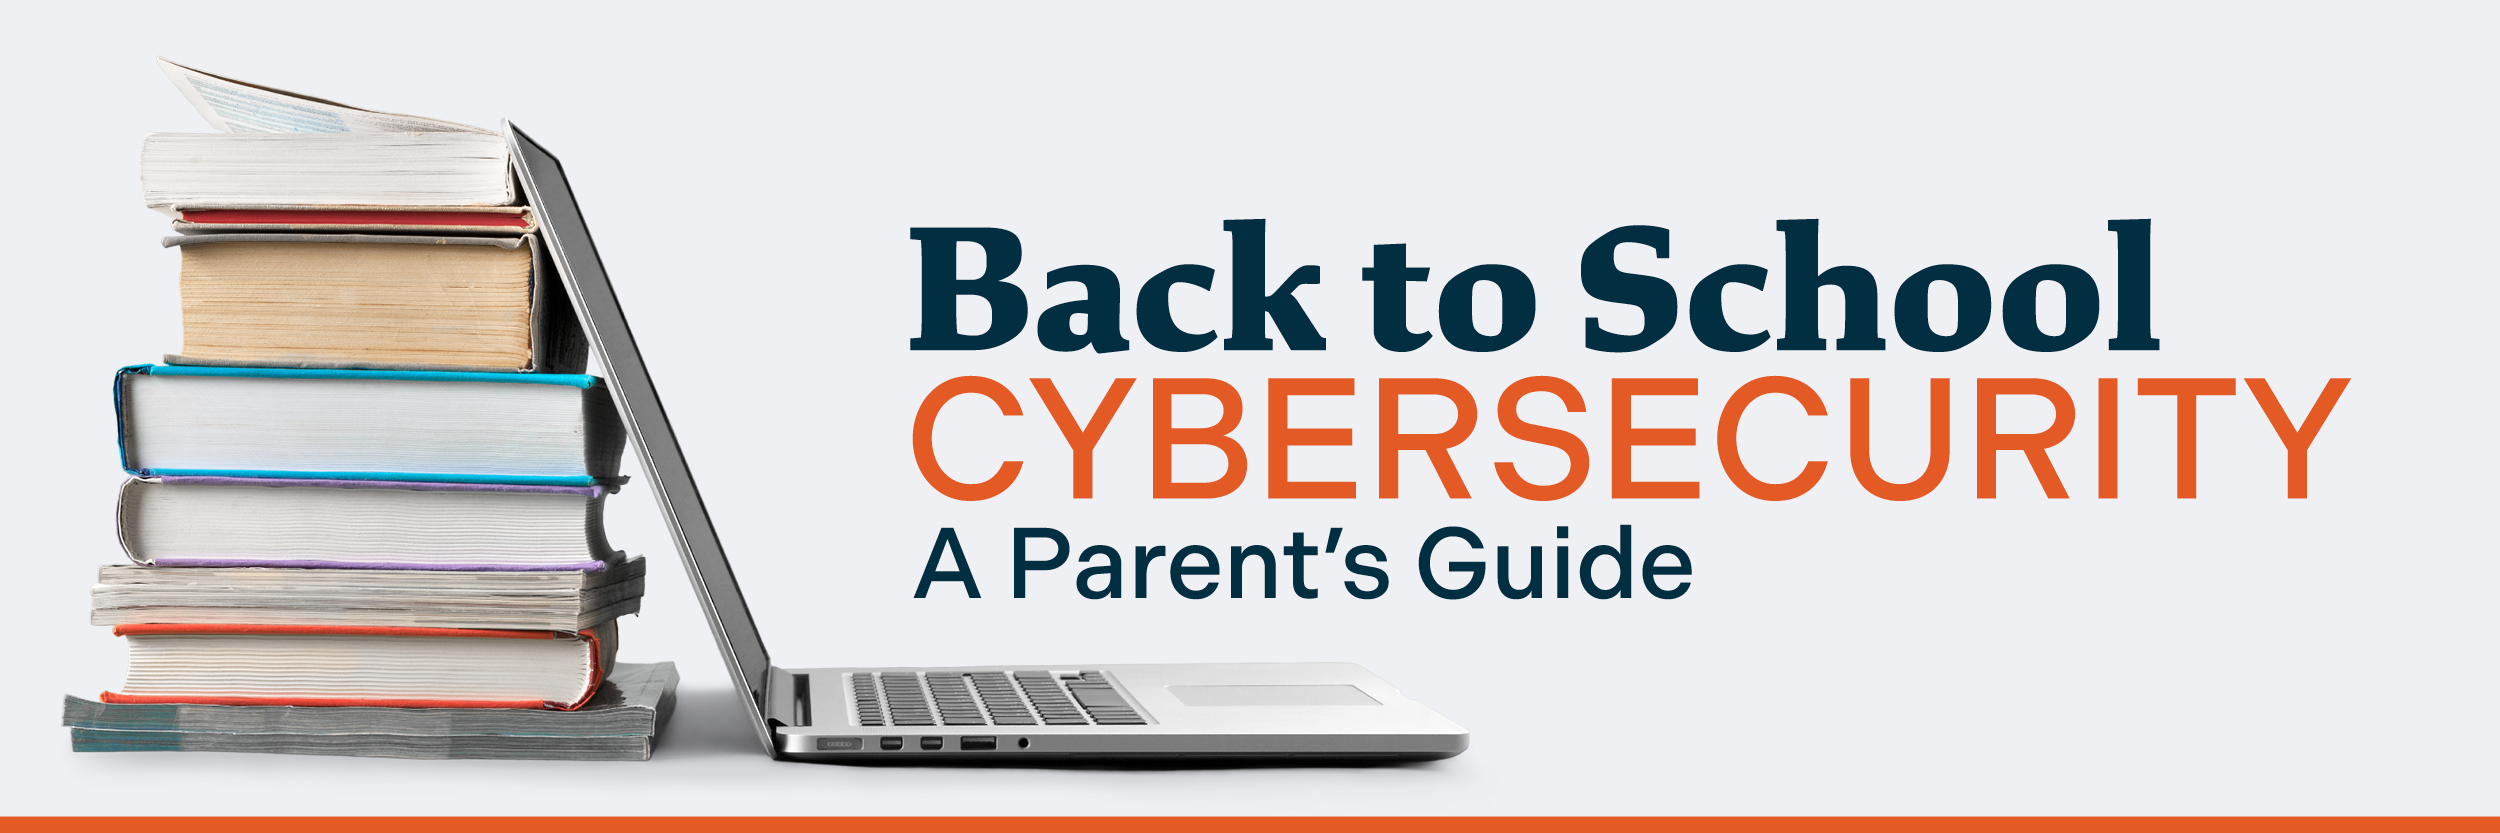 Back-to-School Cybersecurity: A Guide for Parents